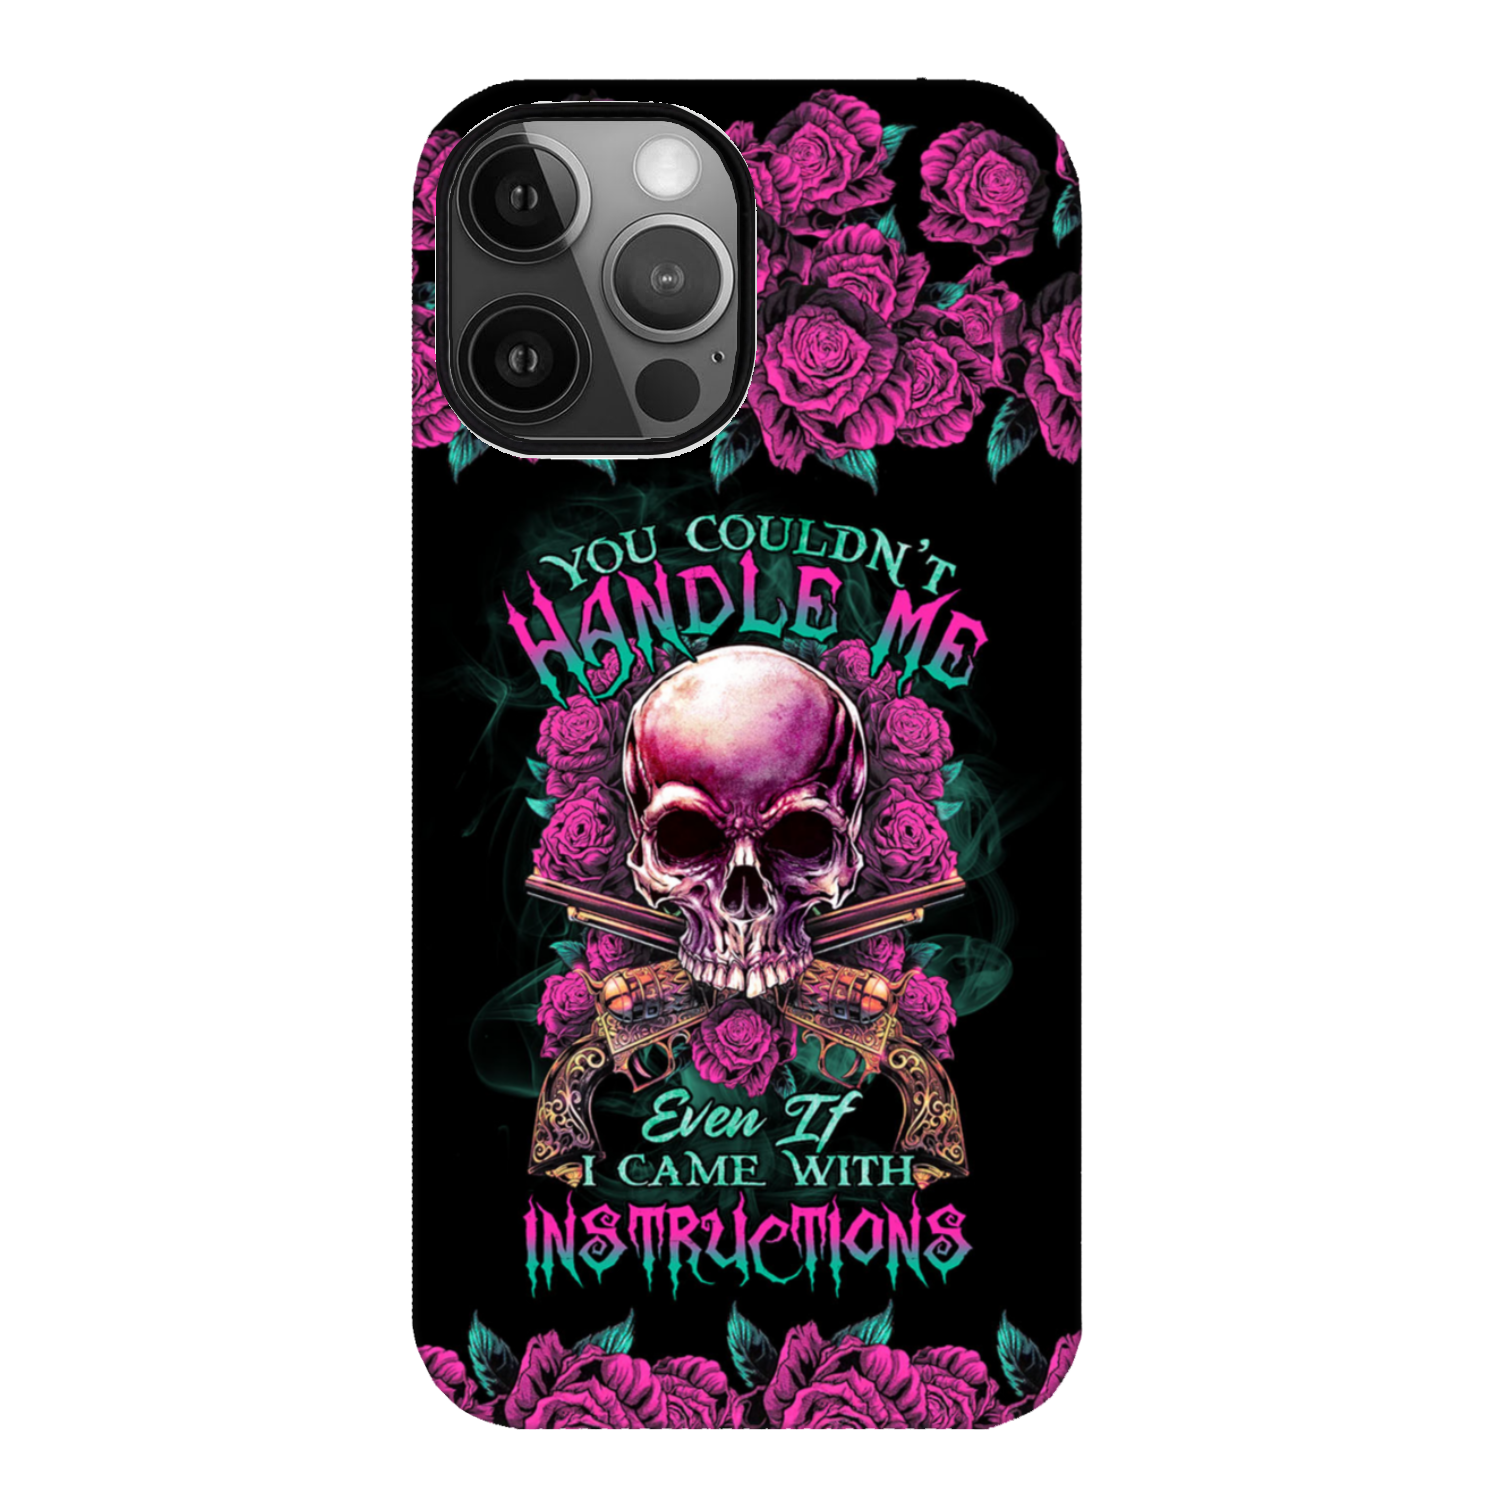 YOU COULDN'T HANDLE ME SKULL G PHONE CASE - TLTR1412223